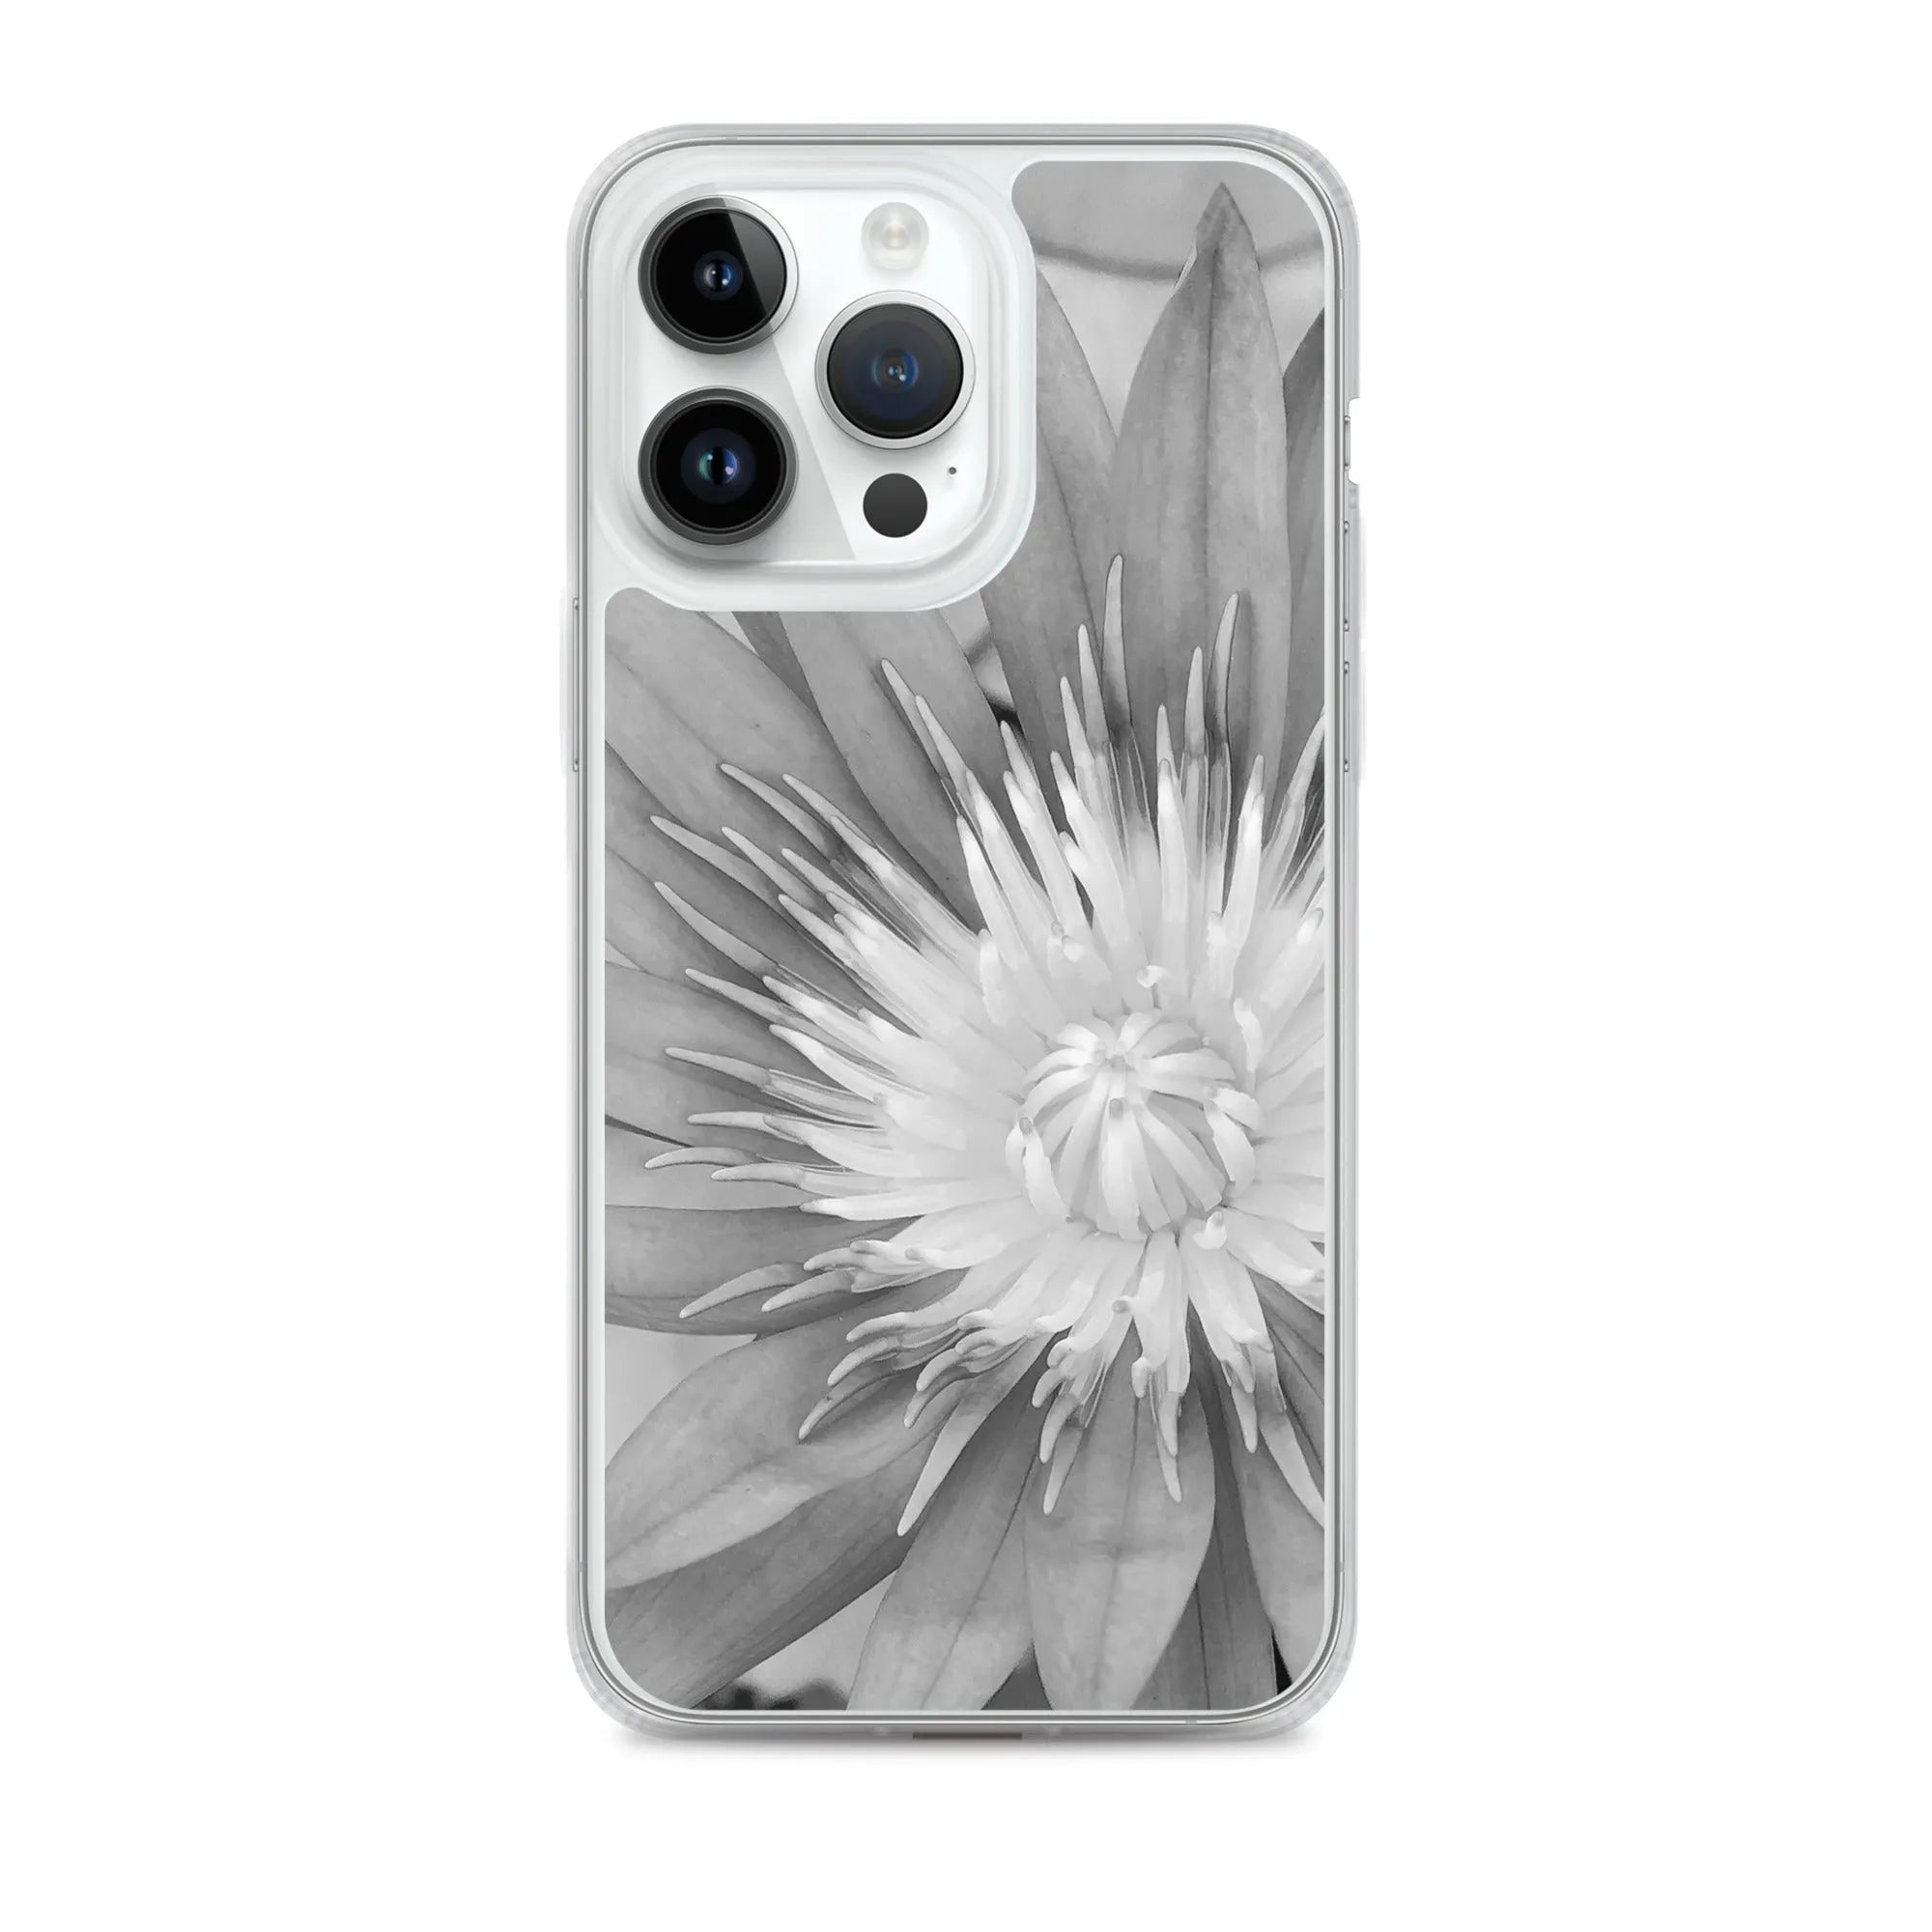 Lilliput Floral Iphone Case - Black And White - Iphone 14 Pro Max - Mobile Phone Cases - Aesthetic Art